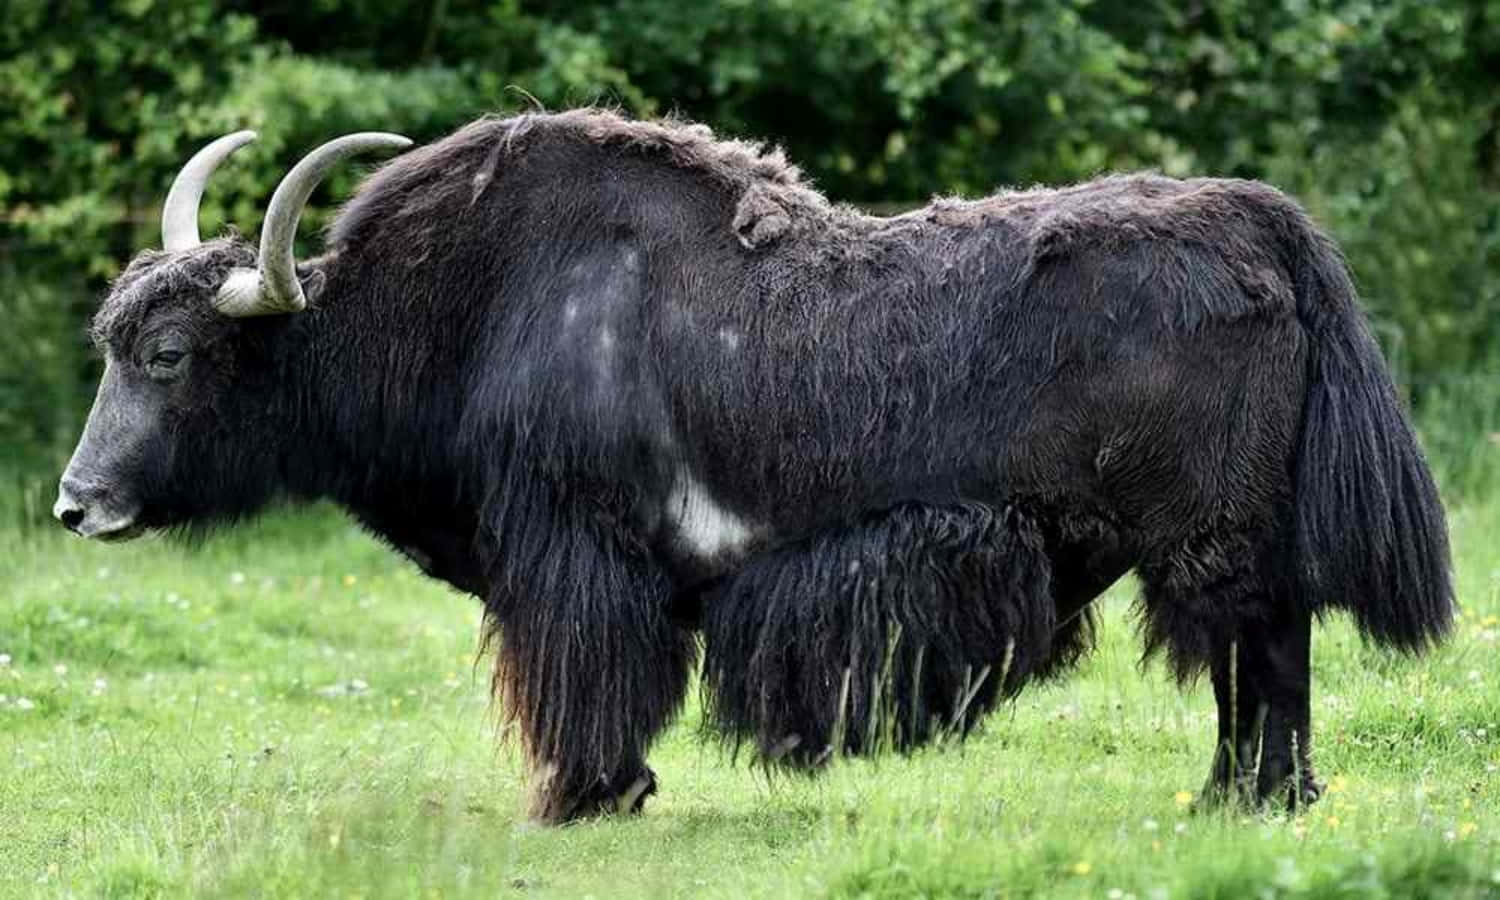 An imposing Yak stands resolutely in the idyllic mountain range